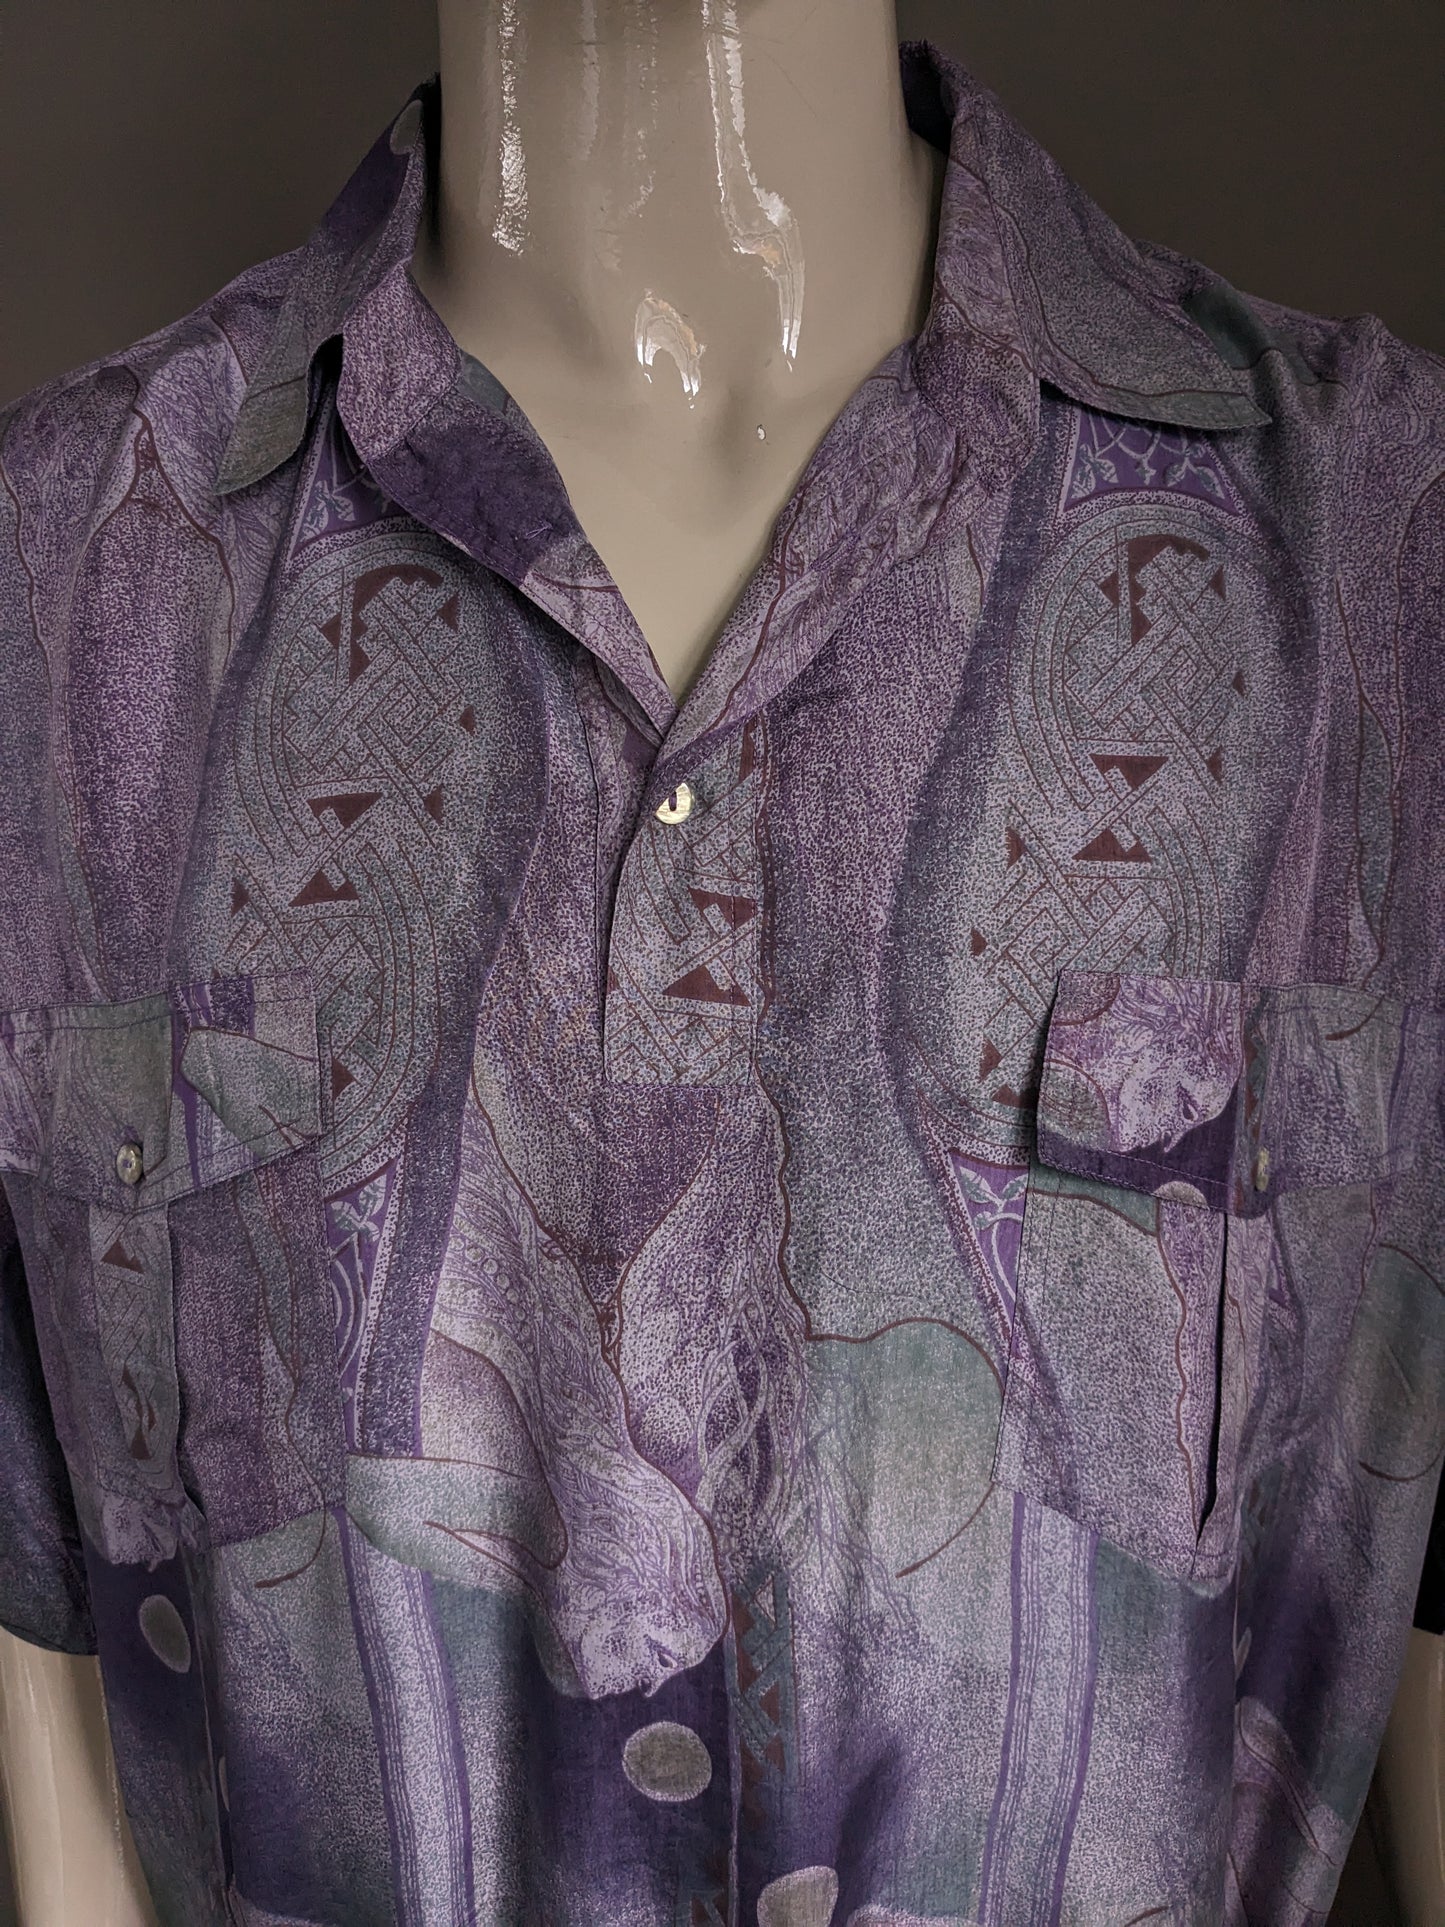 Vintage silk polo with elastic band. Purple brown green print. Size 3XL.